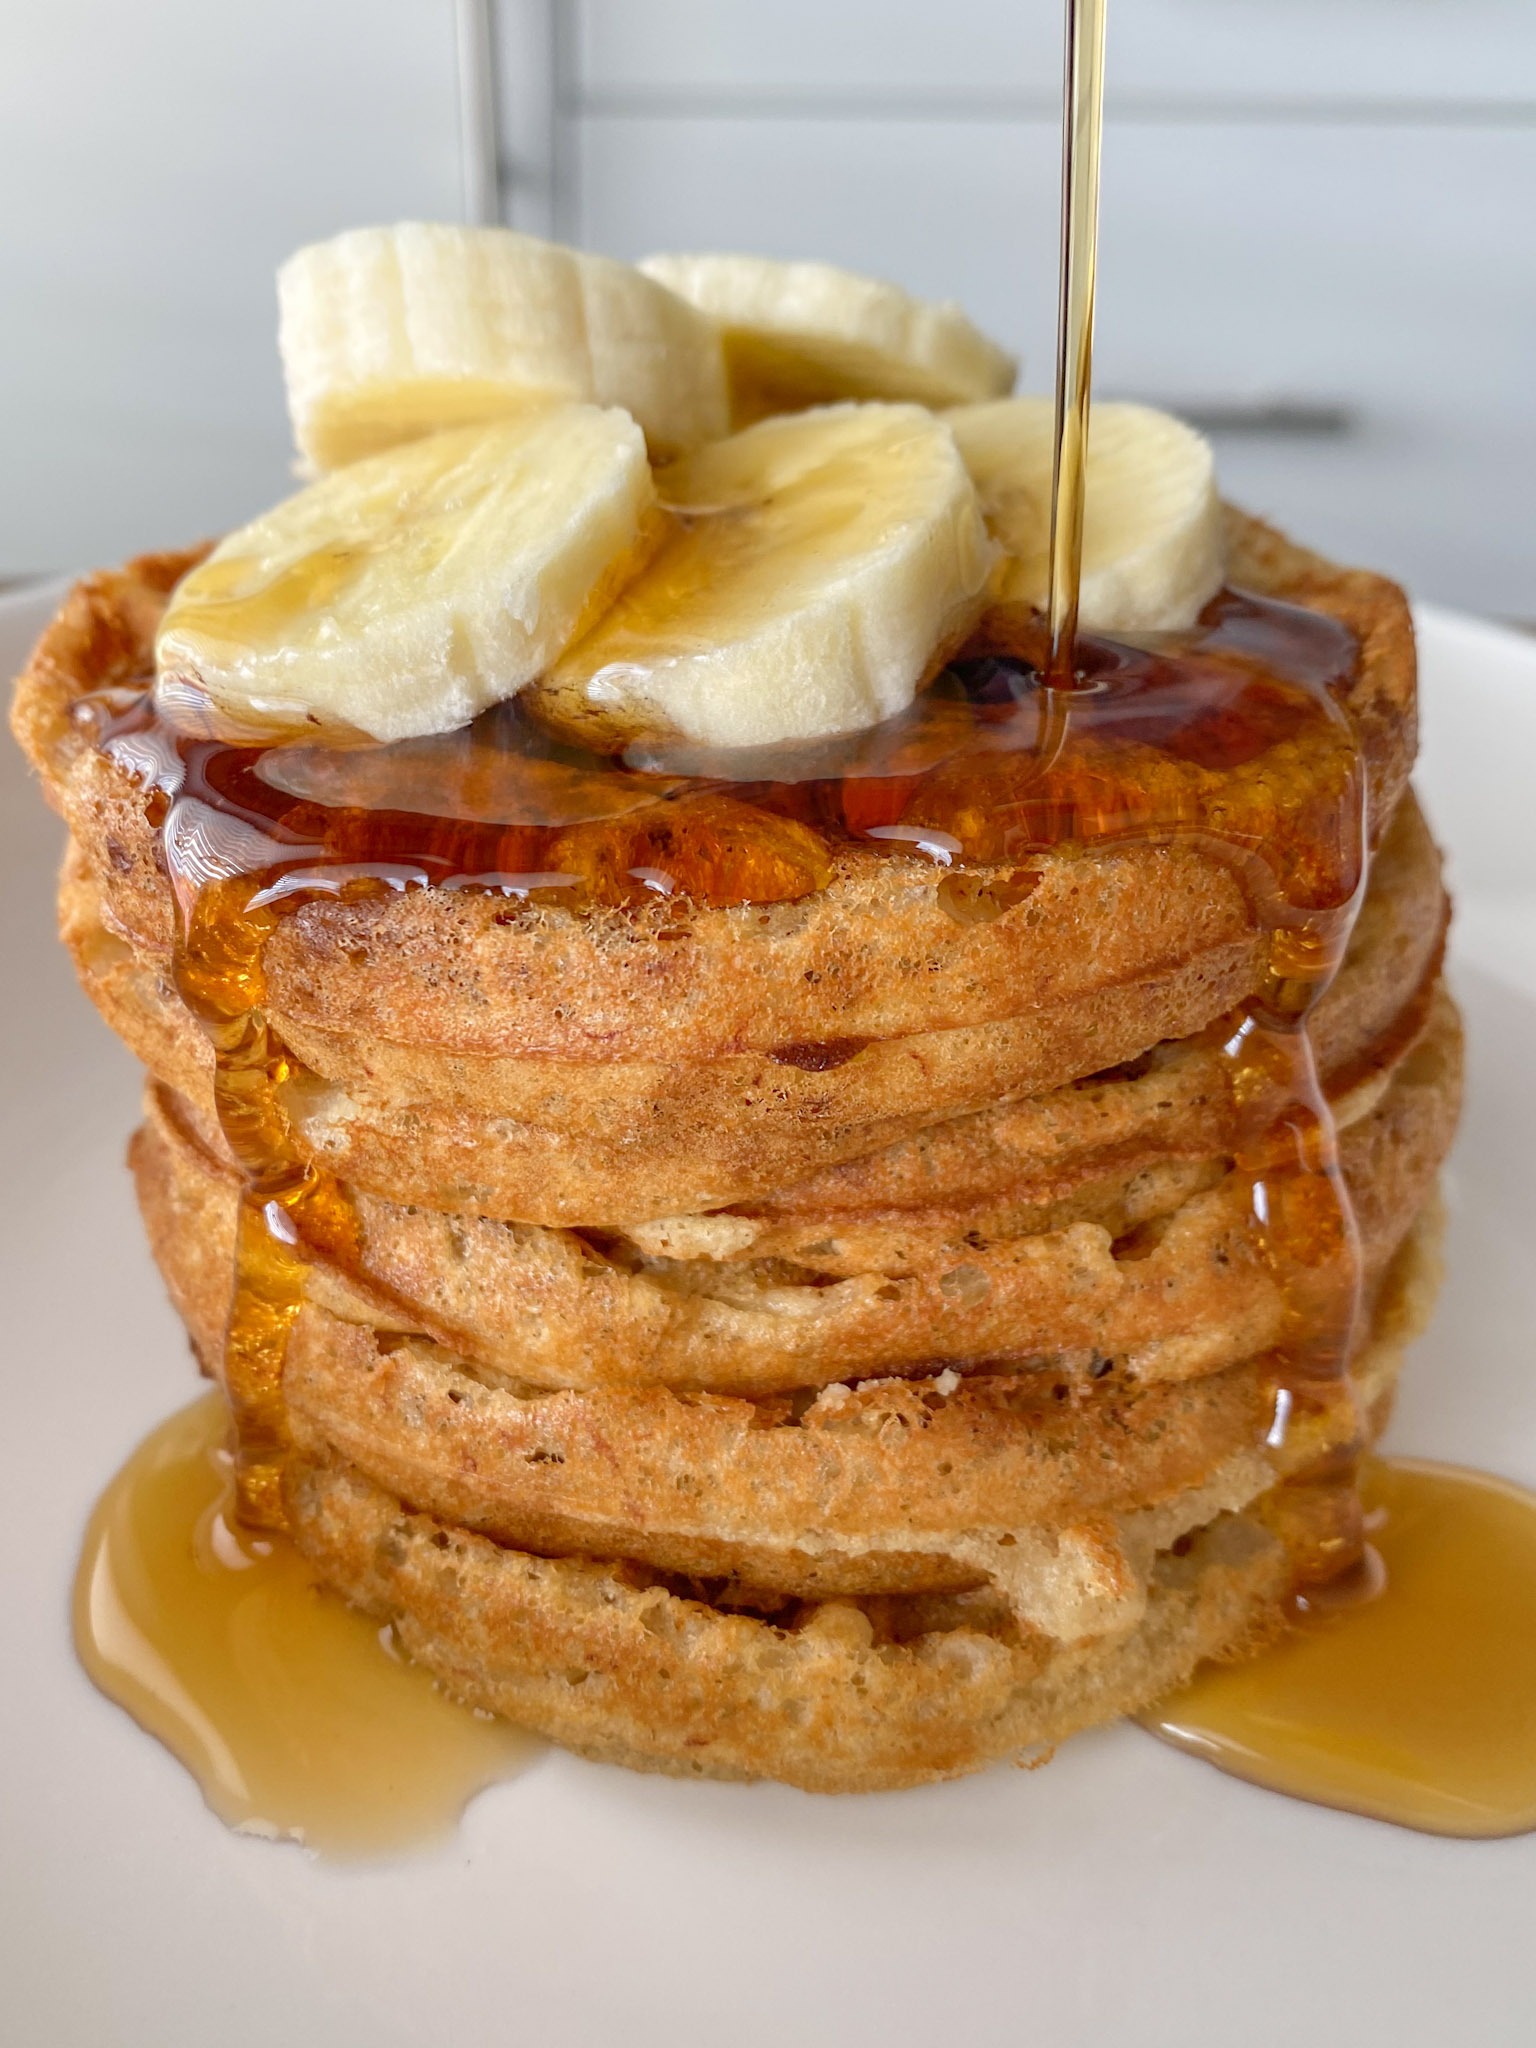 A stack of oat flour waffles topped with sliced banana and maple syrup.